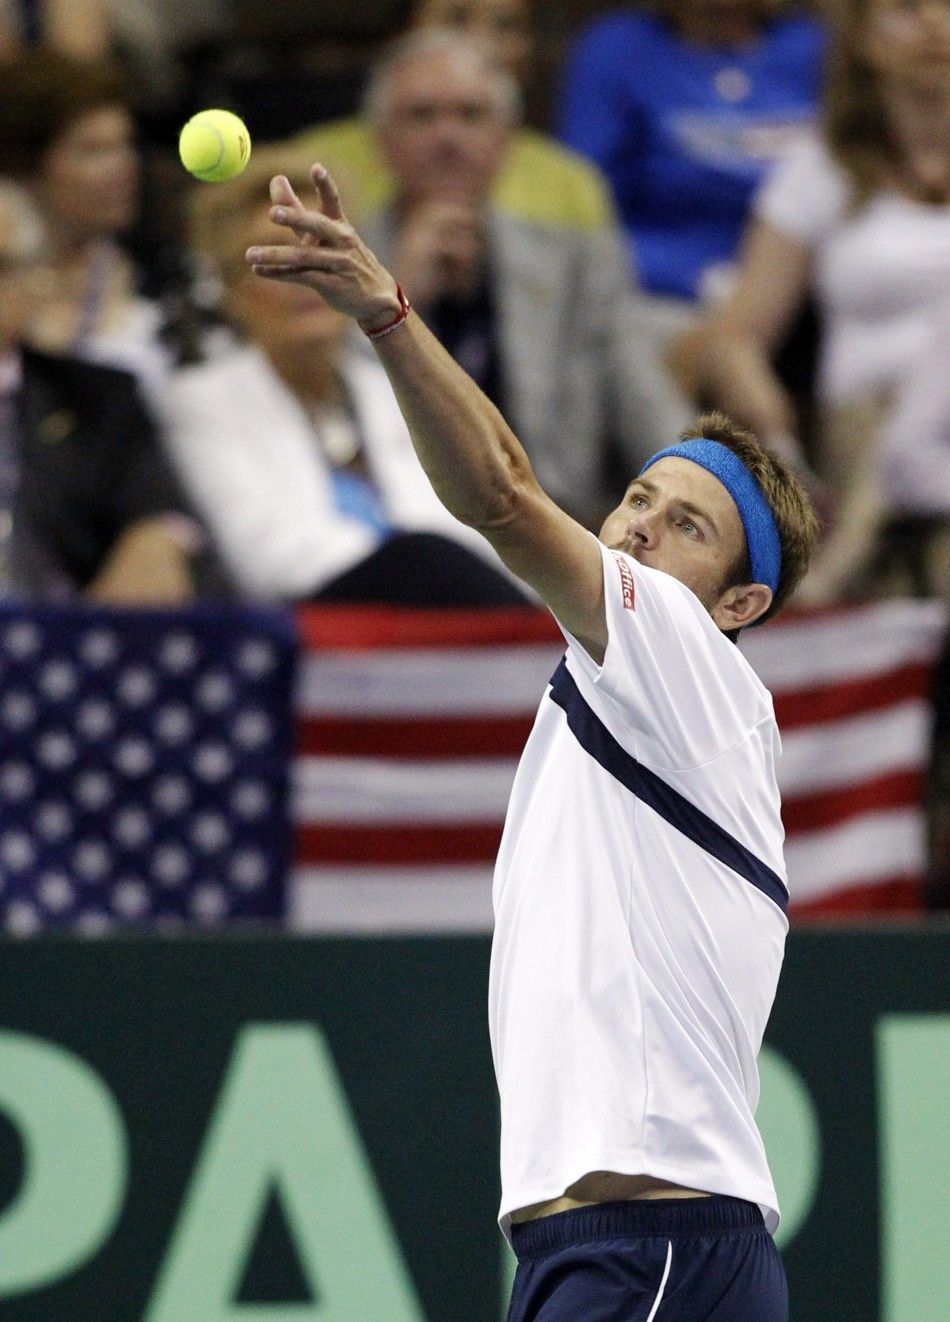 David Ferrrer defeating Mandy Fish booked Spain in semi-finals of Davis Cup